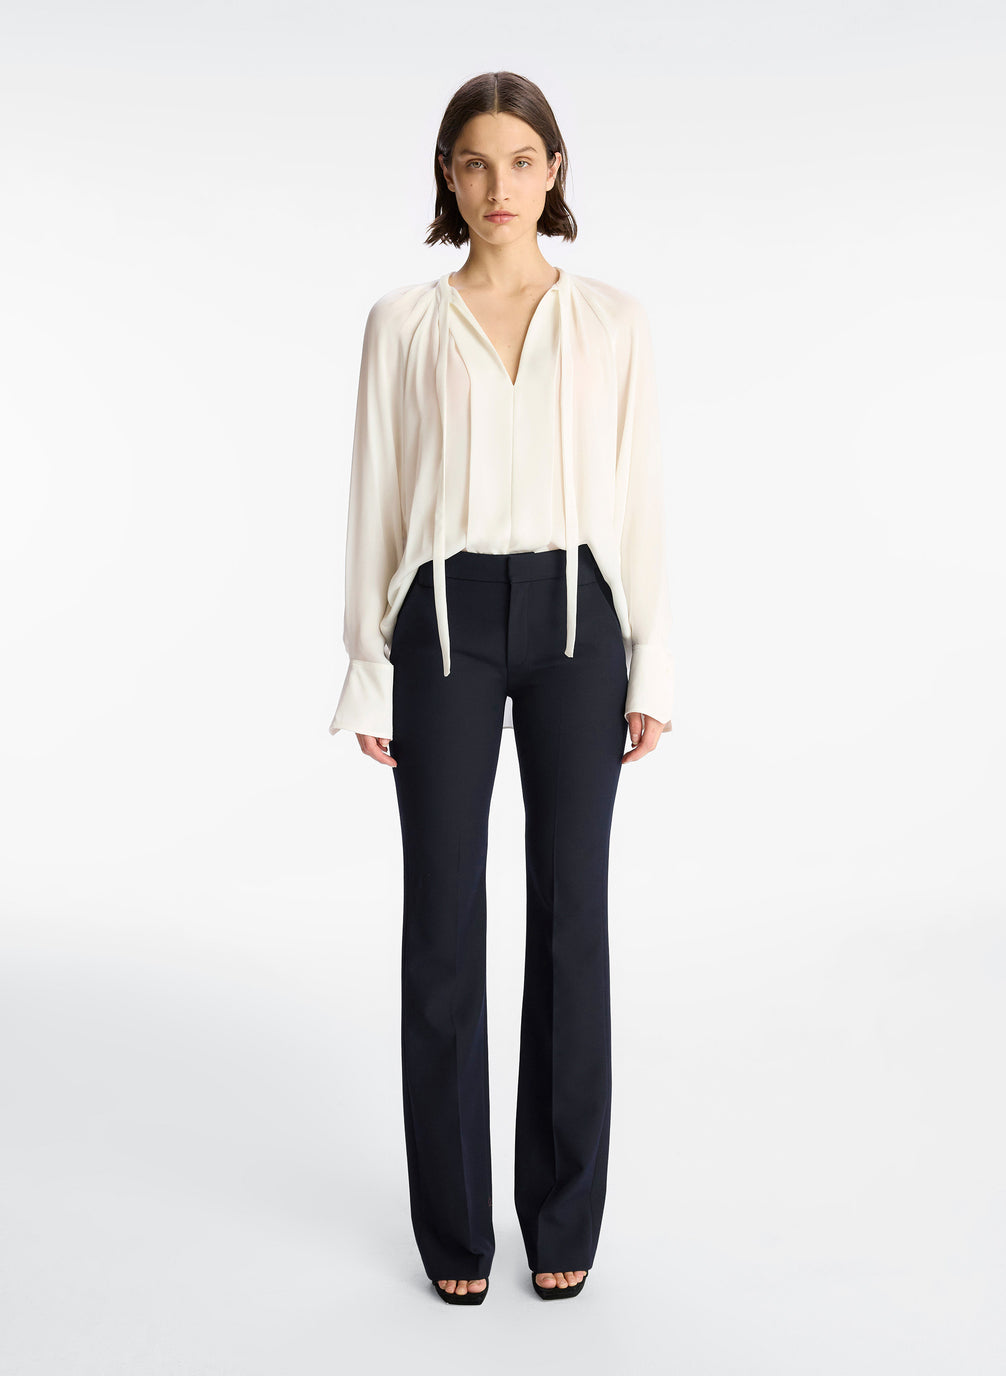 front view of woman wearing cream long sleeve v neck blouse and navy blue pants